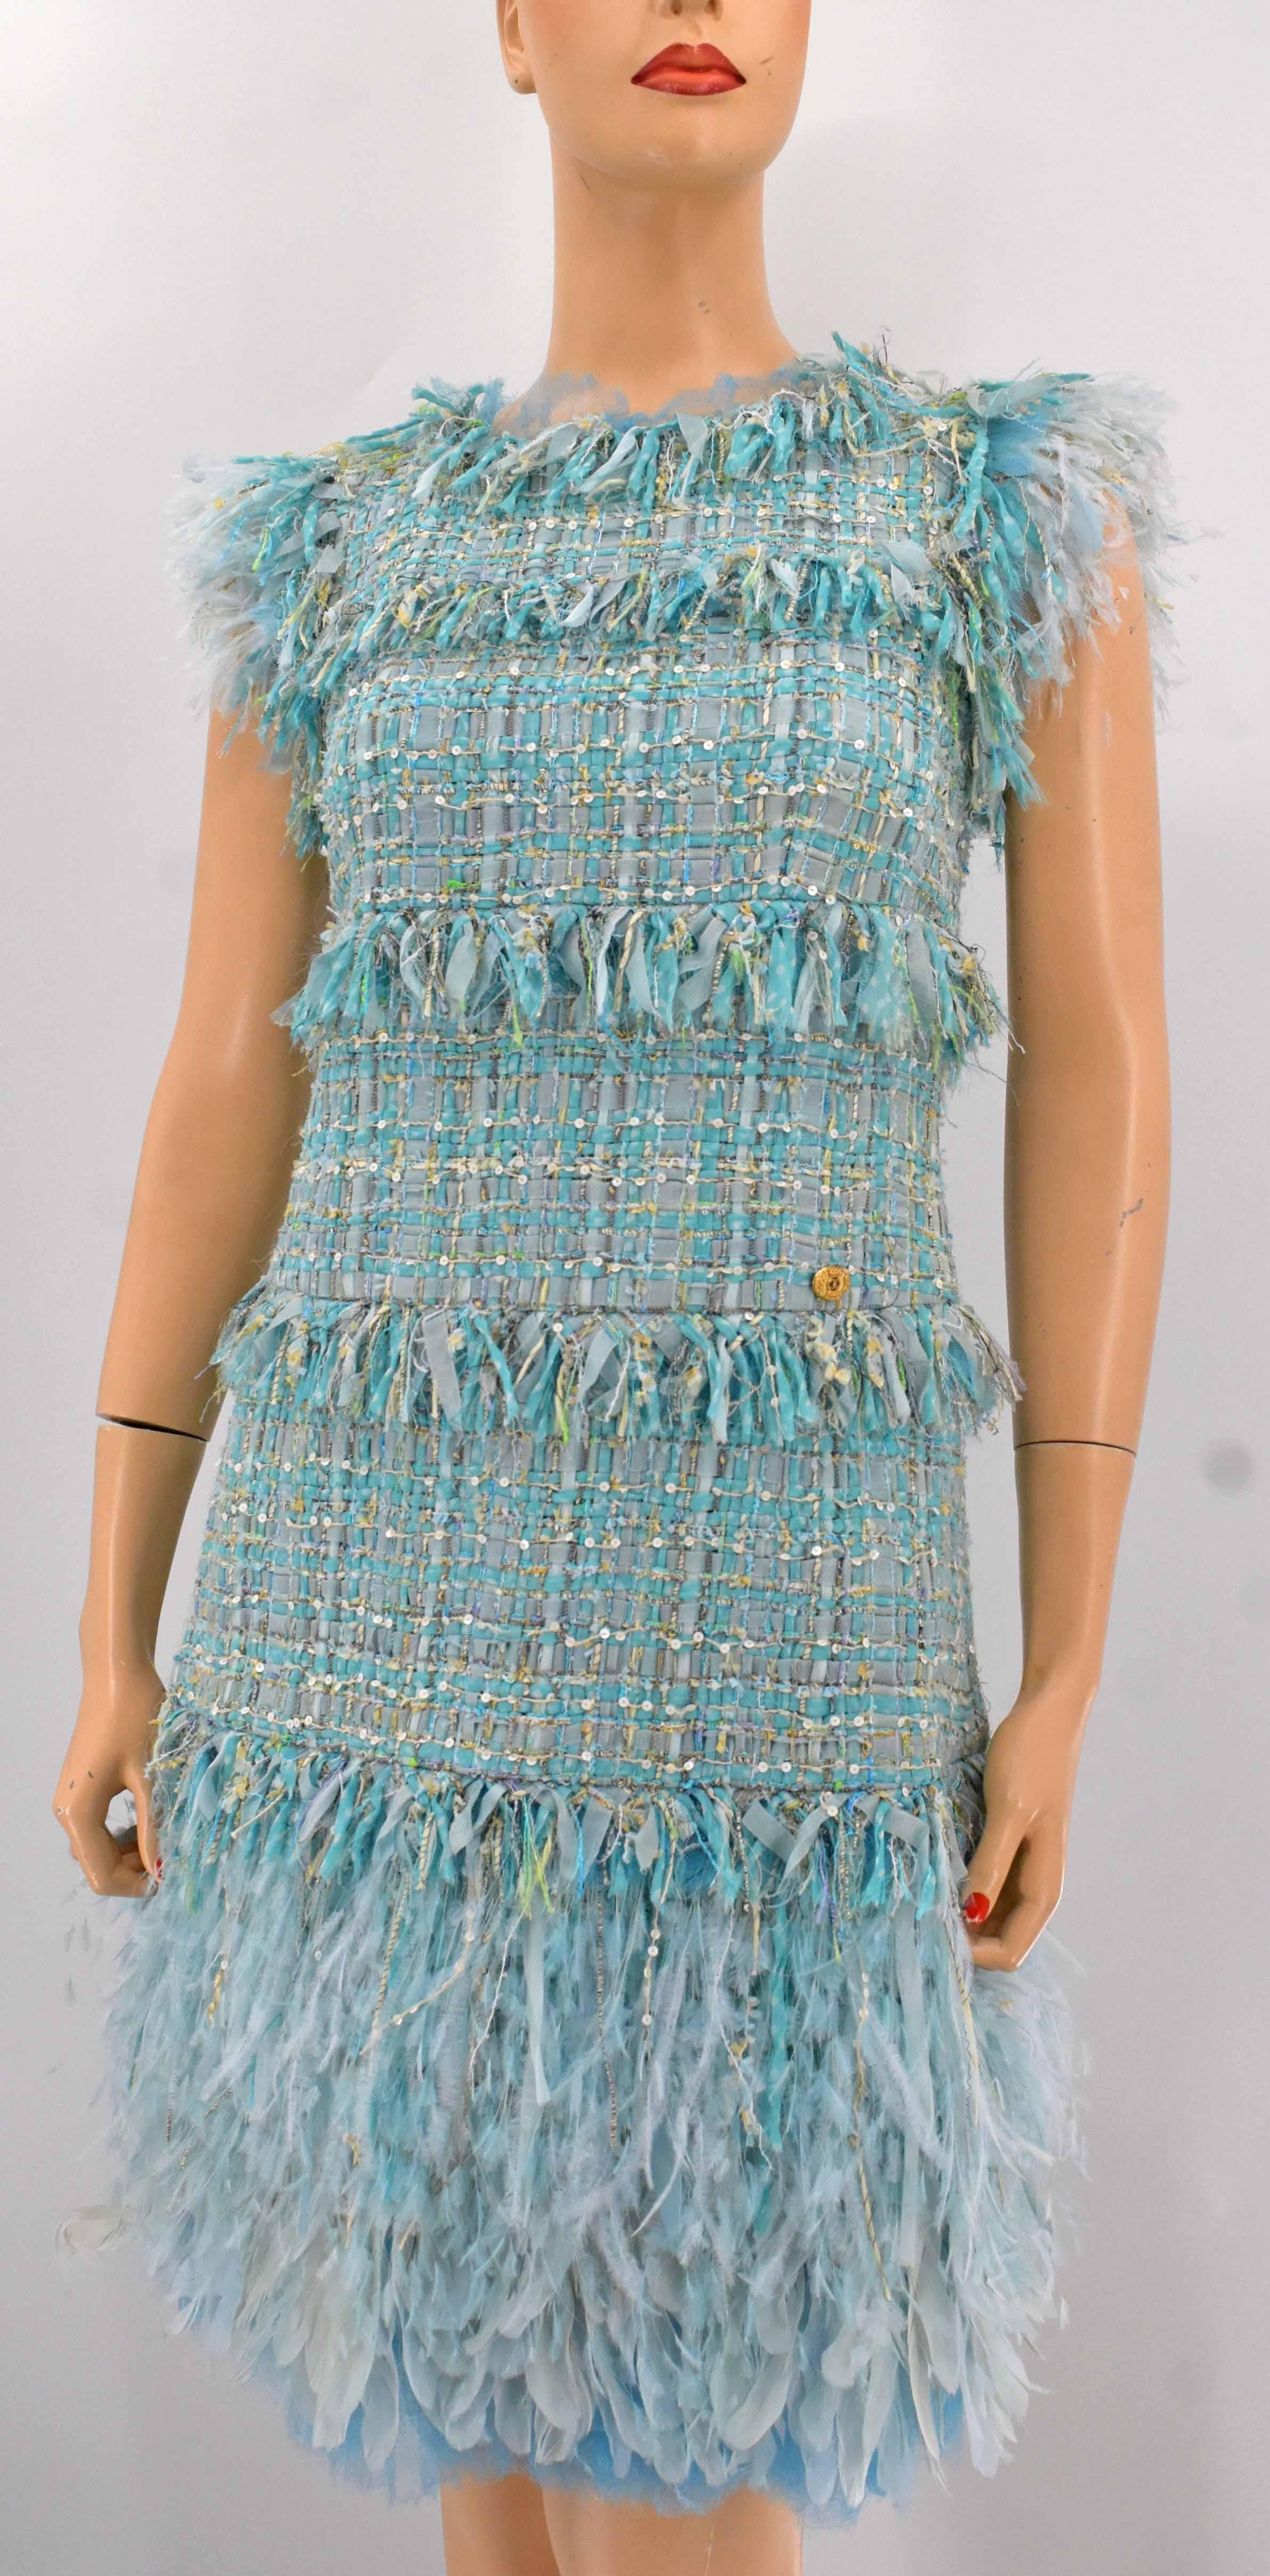 Chanel rare runway fringe dress with jeweled belt. This is from Chanel Spring 2011 runway collection. It is new with tag and fabric swatch.  It retails $14,310 before tax. 